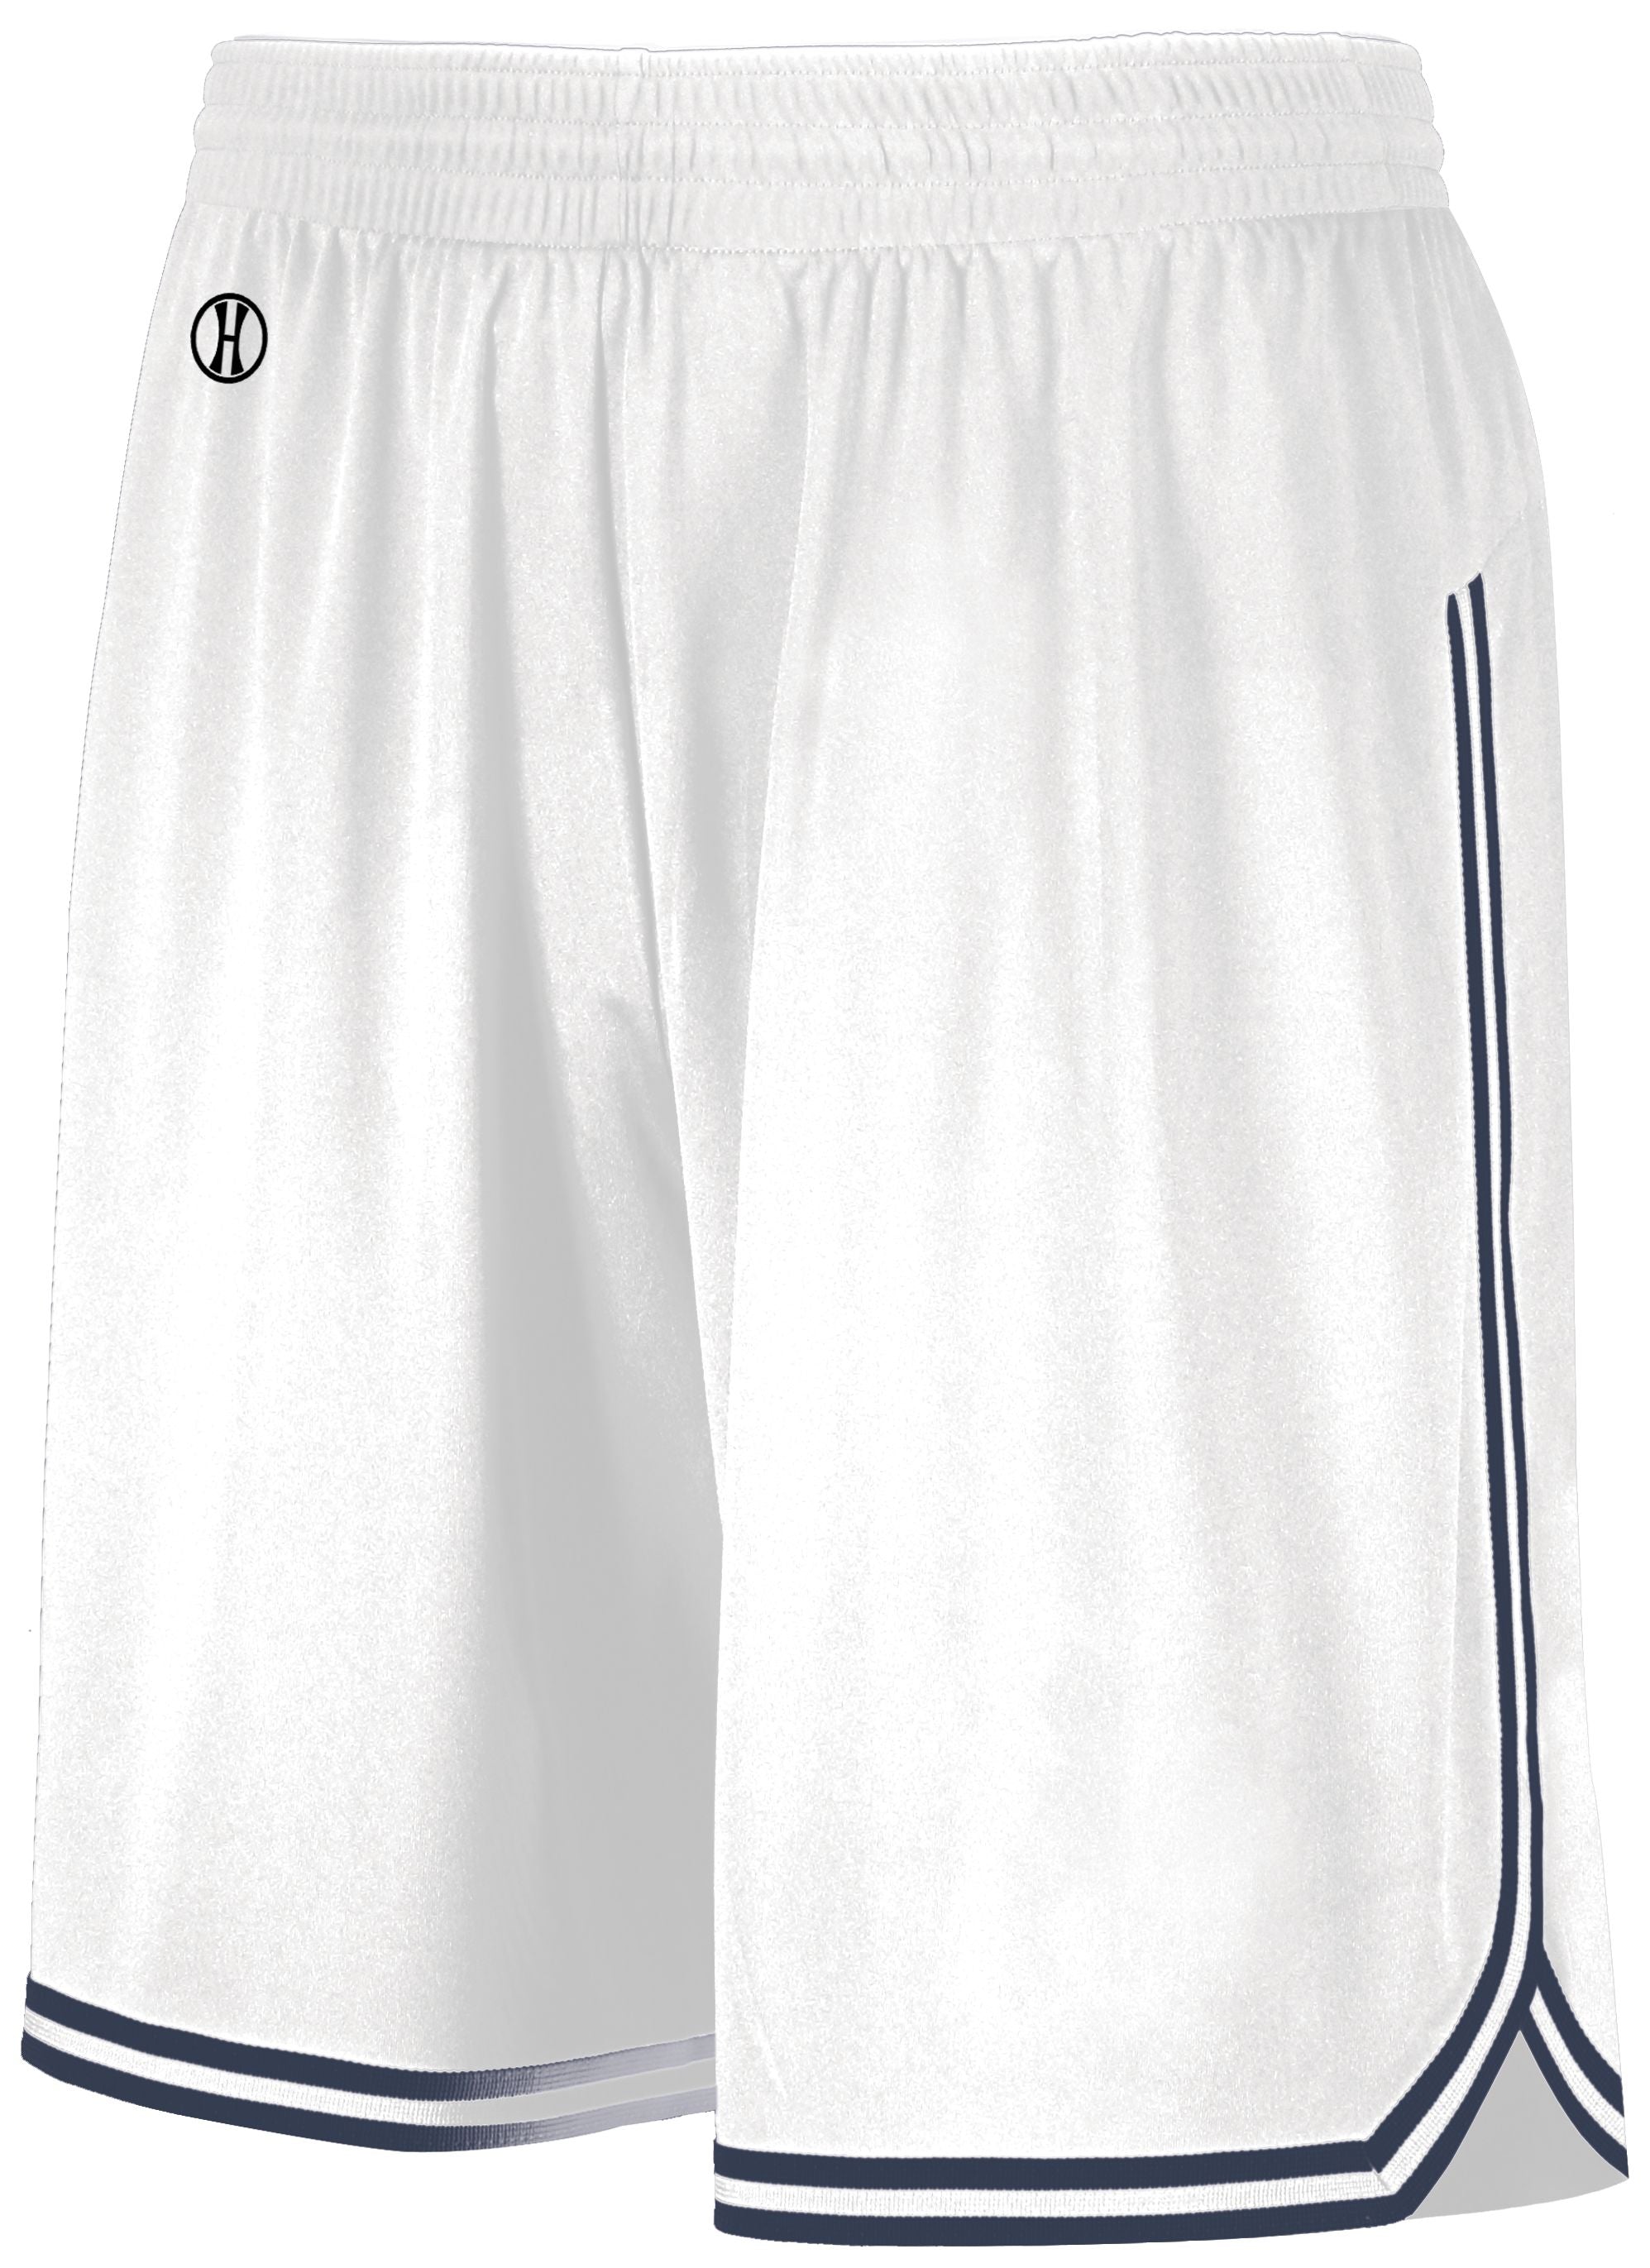 Holloway Retro Basketball Shorts in White/Navy  -Part of the Adult, Adult-Shorts, Basketball, Holloway, All-Sports, All-Sports-1 product lines at KanaleyCreations.com